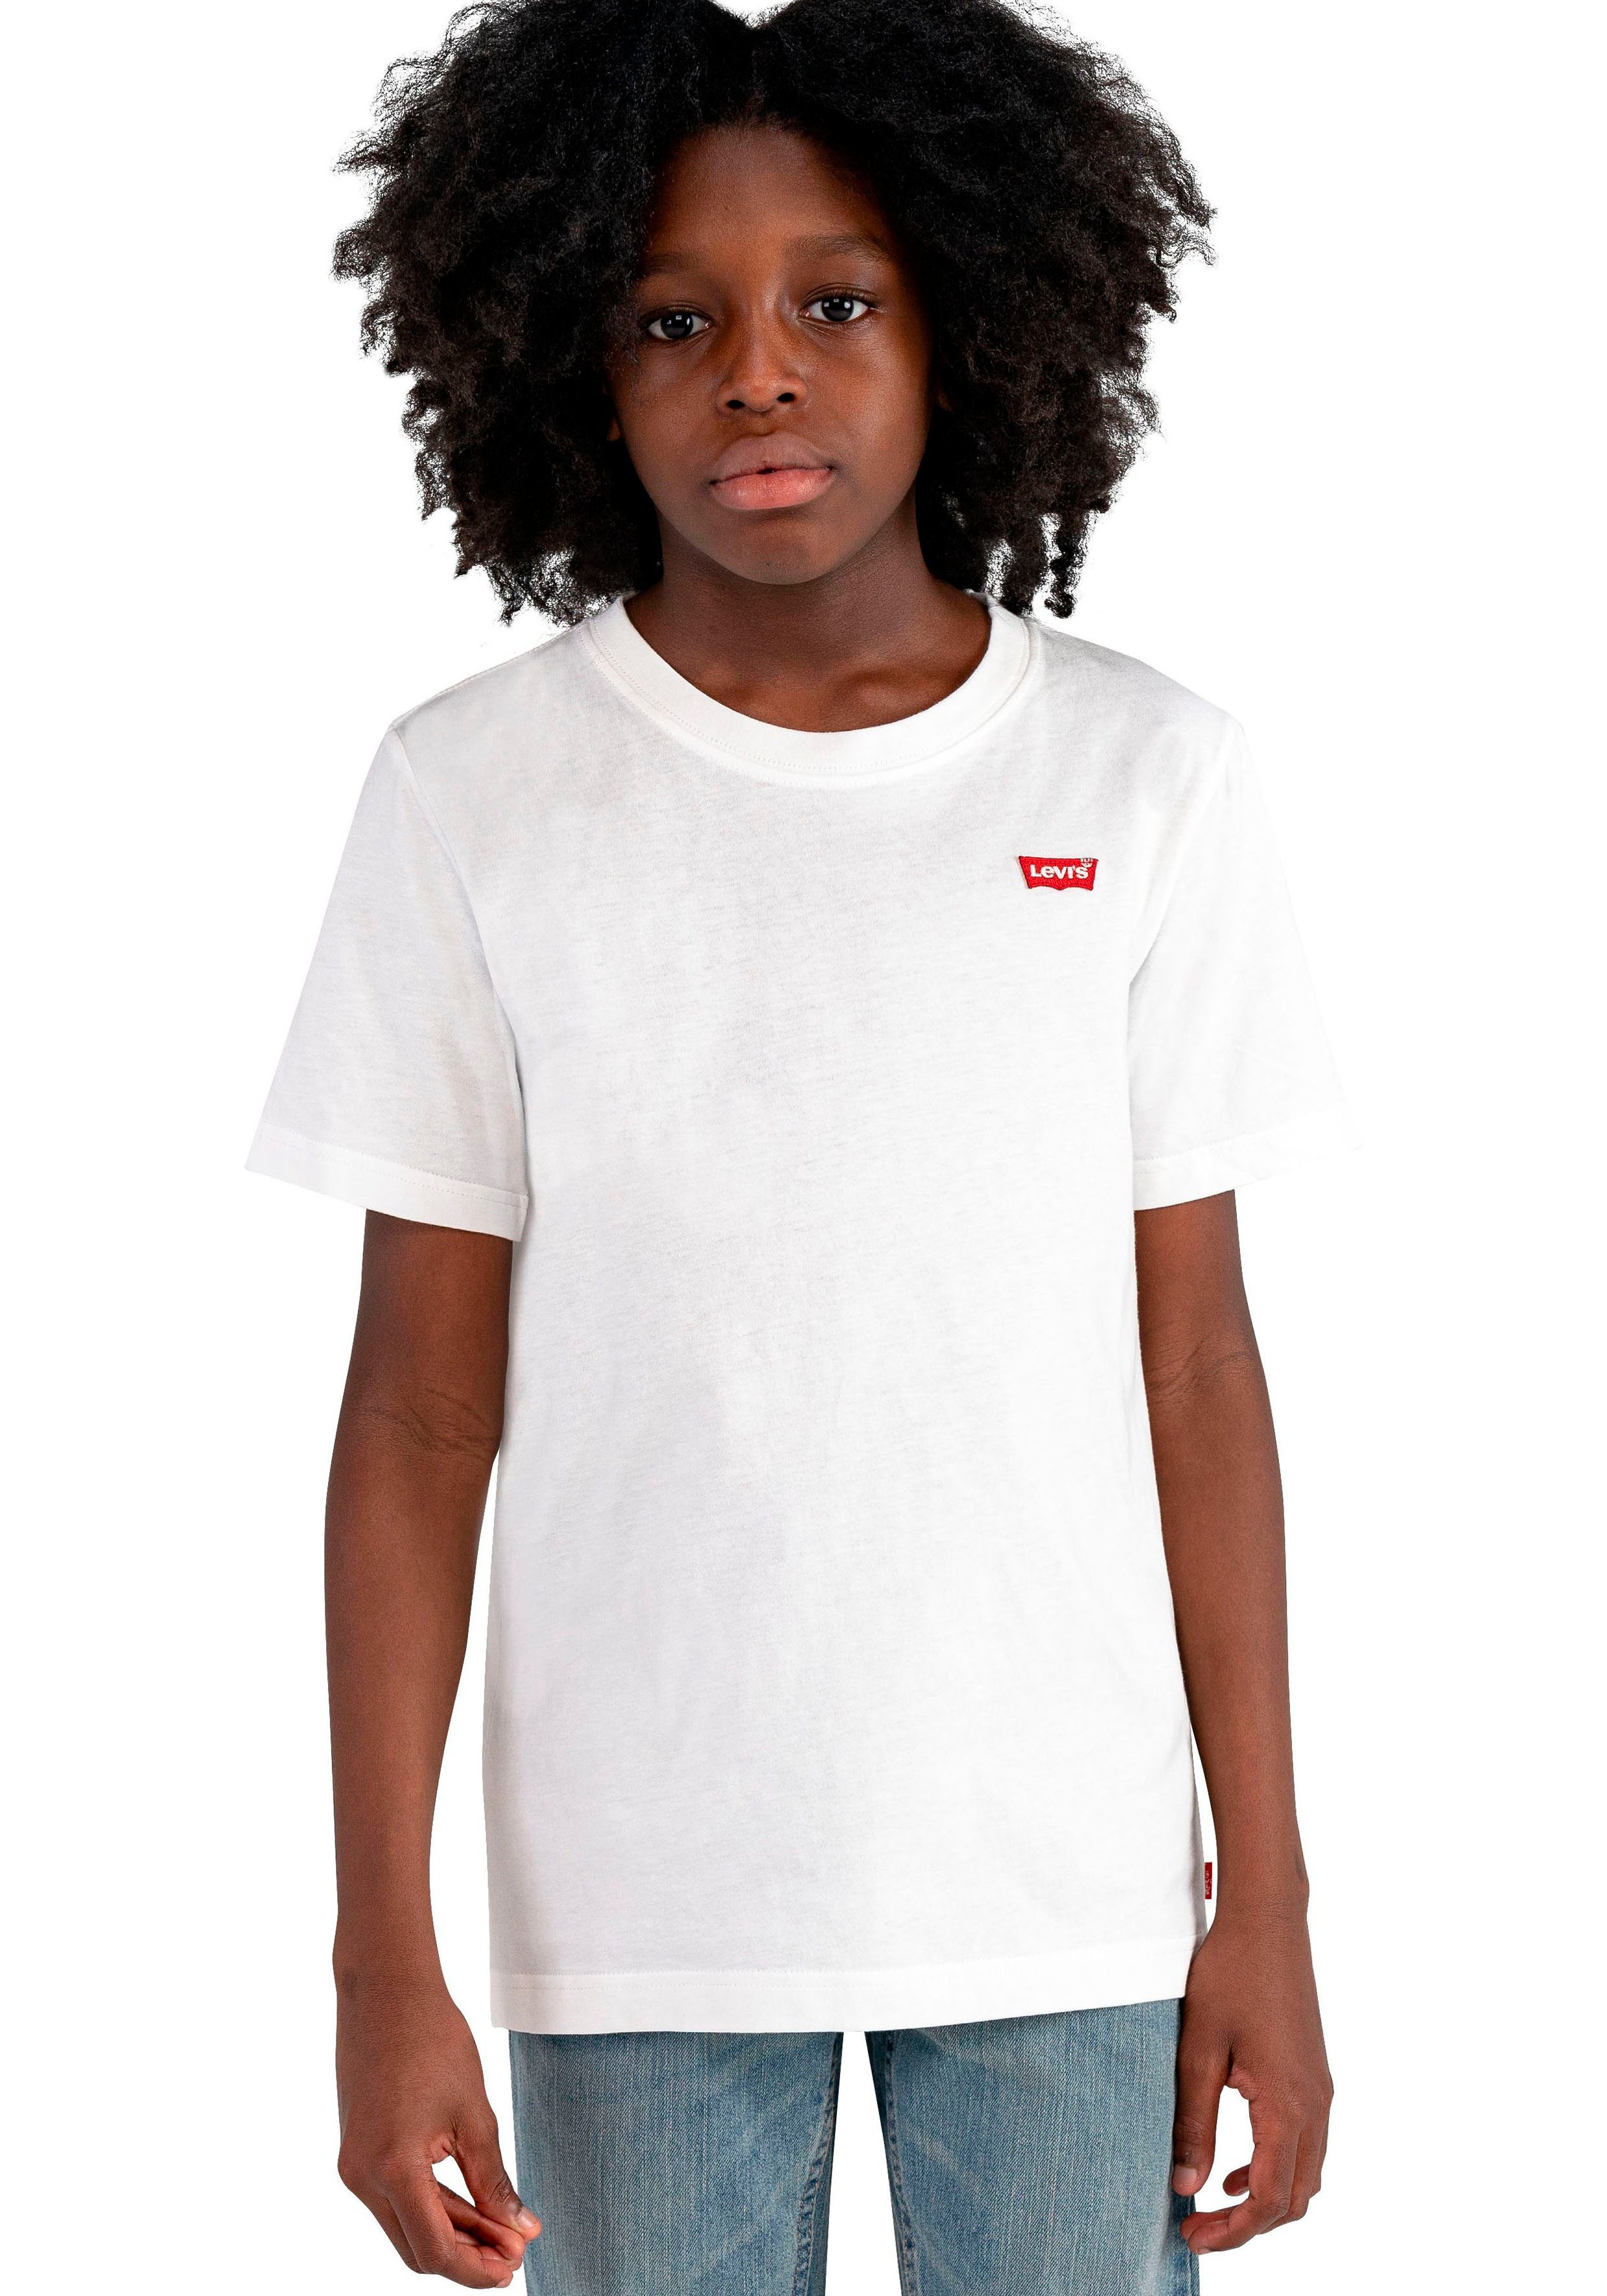 BATWING Kids BOYS HIT T-Shirt Levi's® white CHEST for